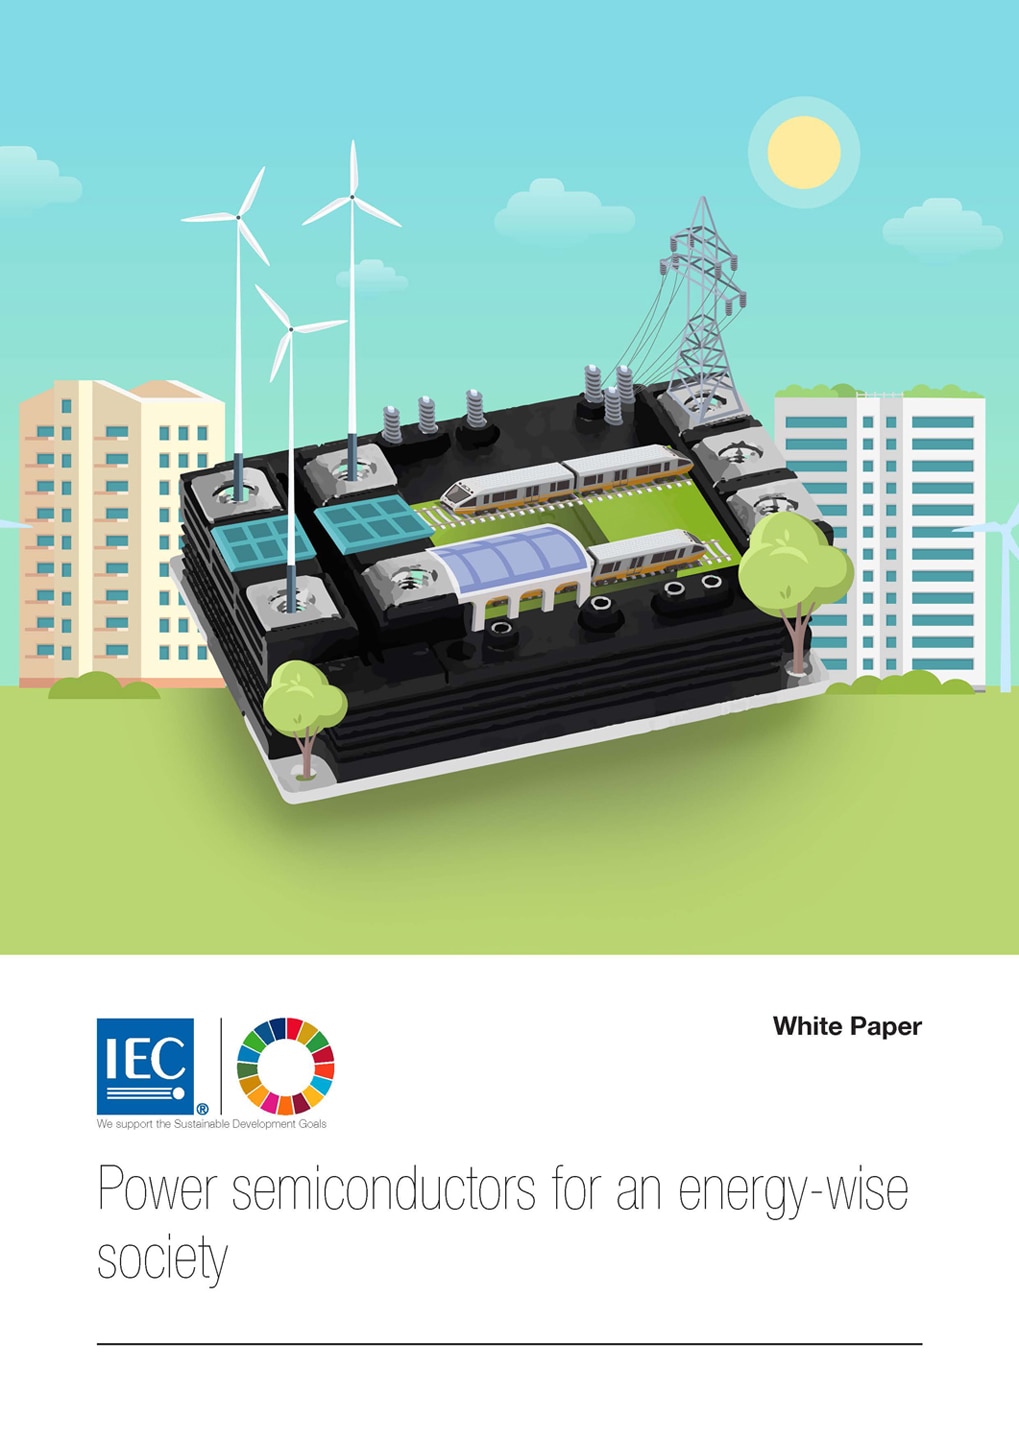 "Power semiconductors for an Energy-Wise society" White Paper issued by IEC on O